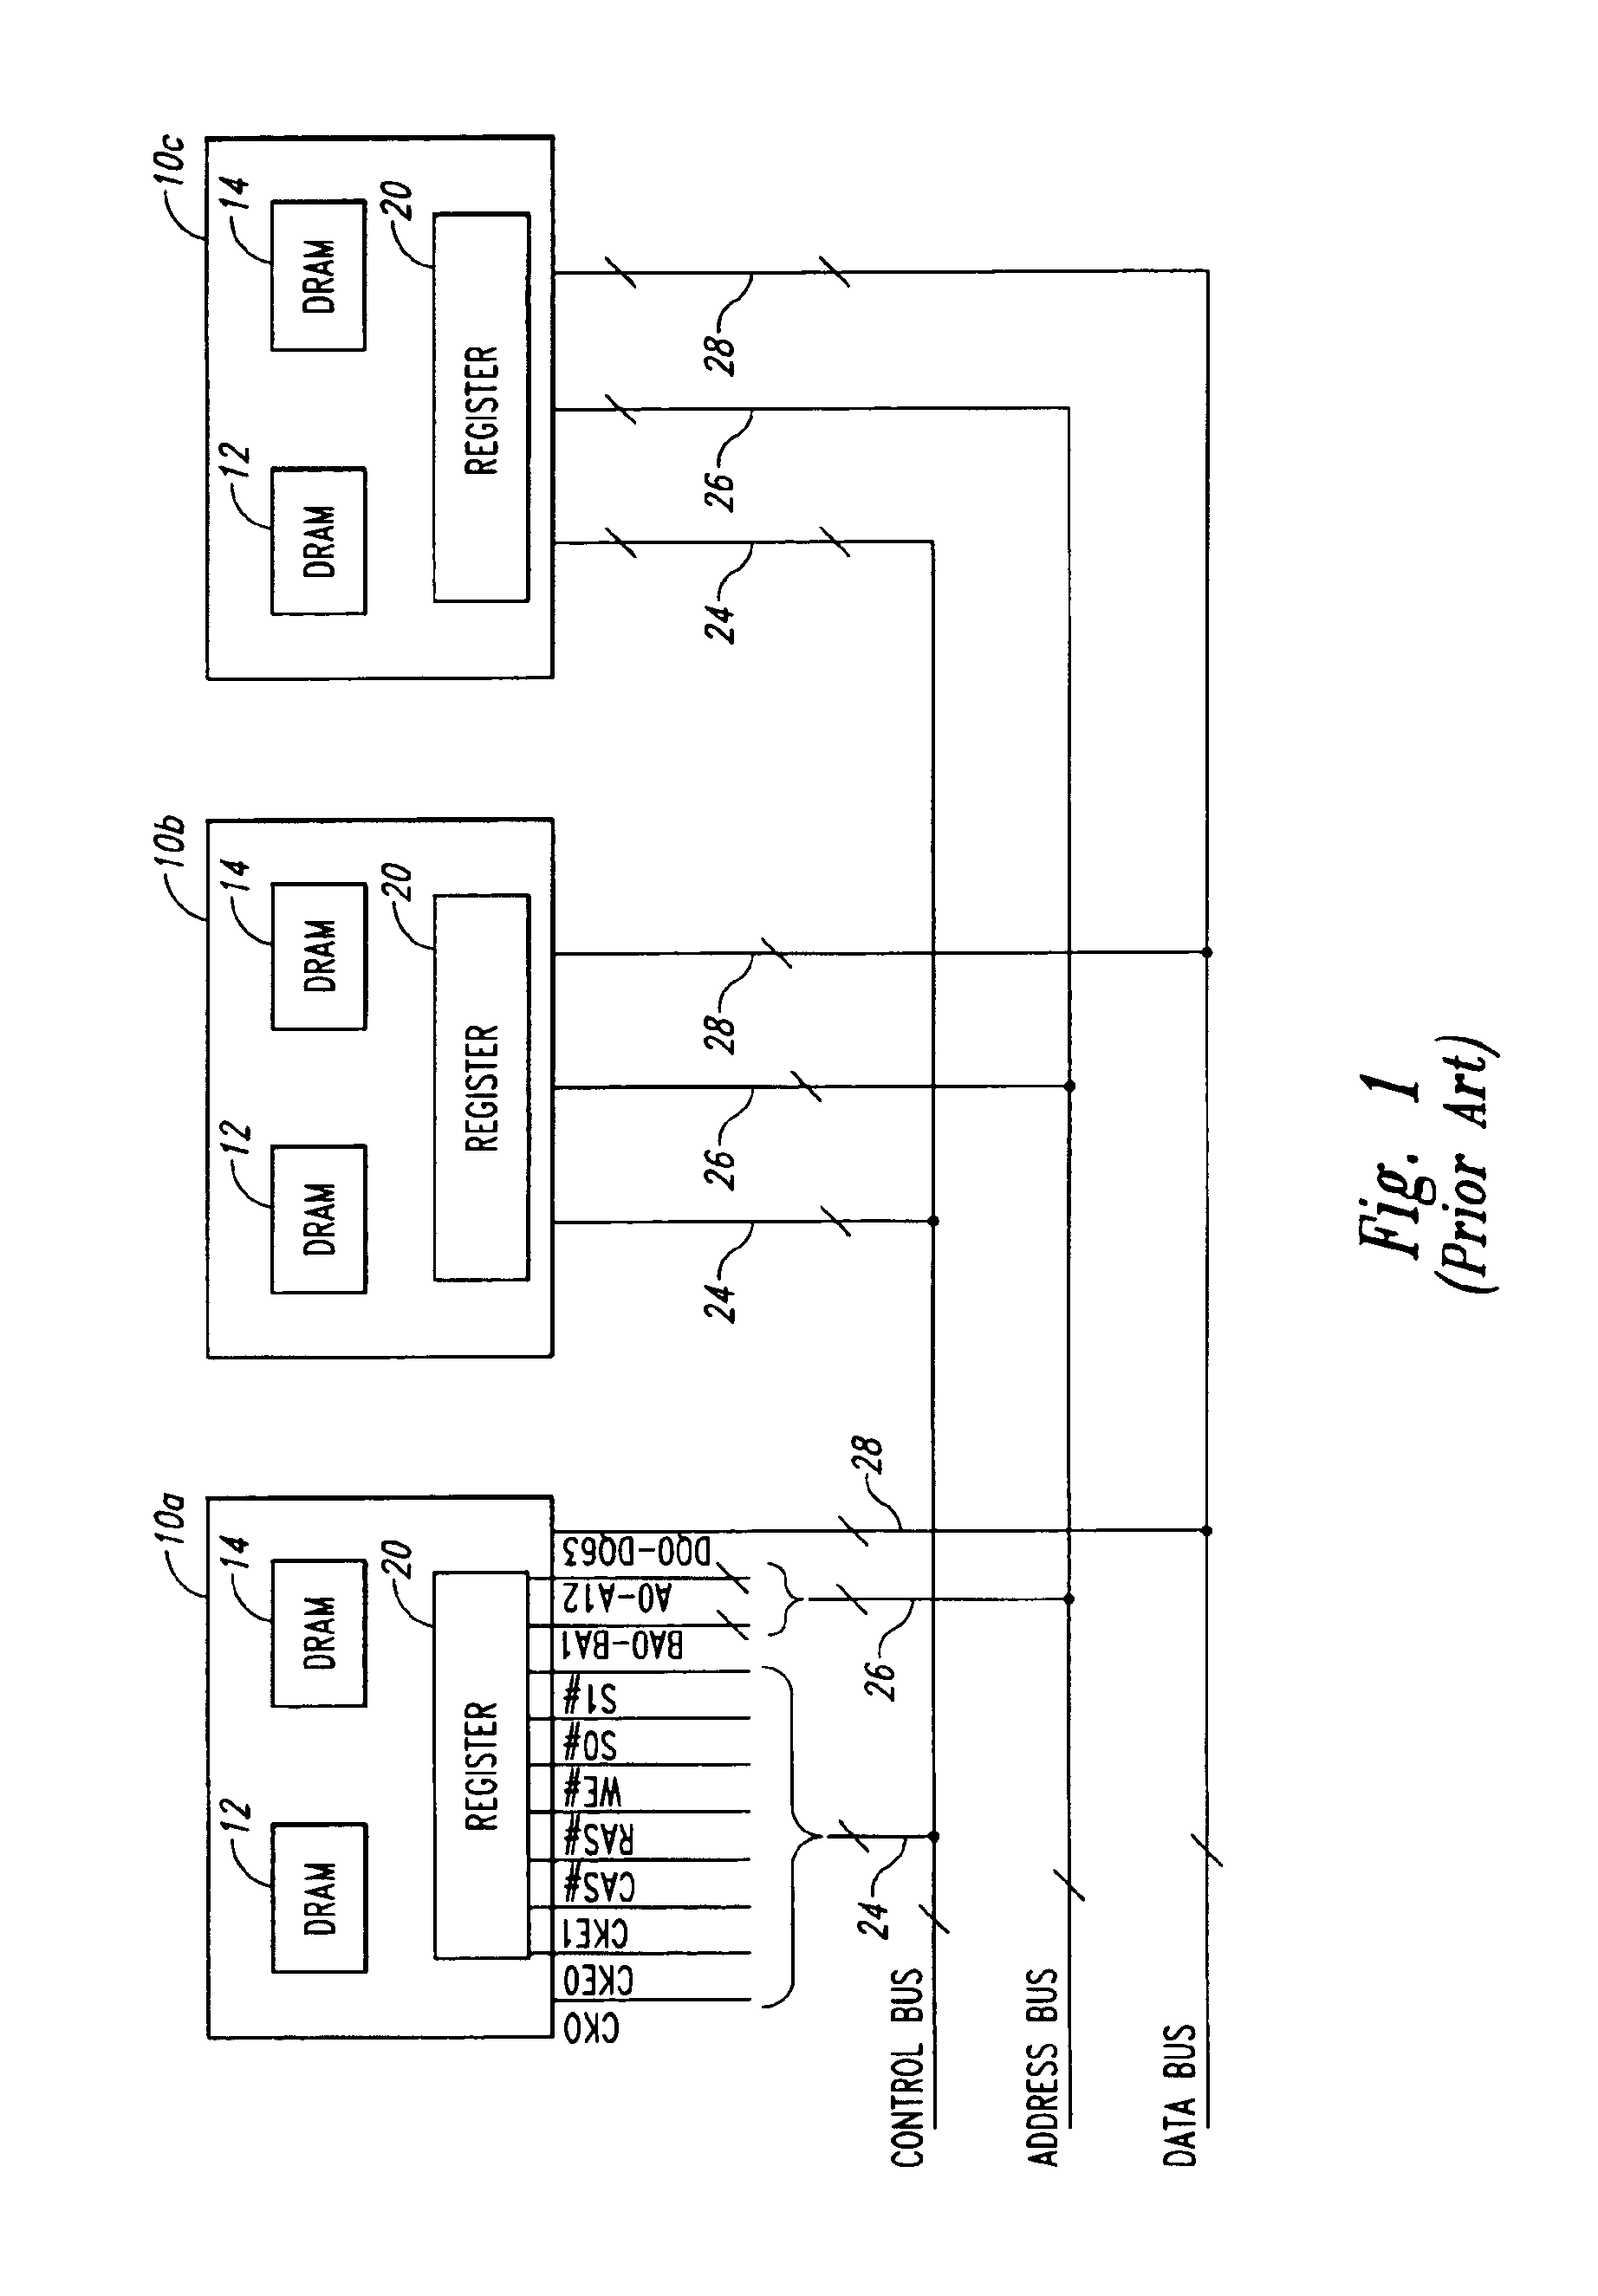 Reduced power registered memory module and method